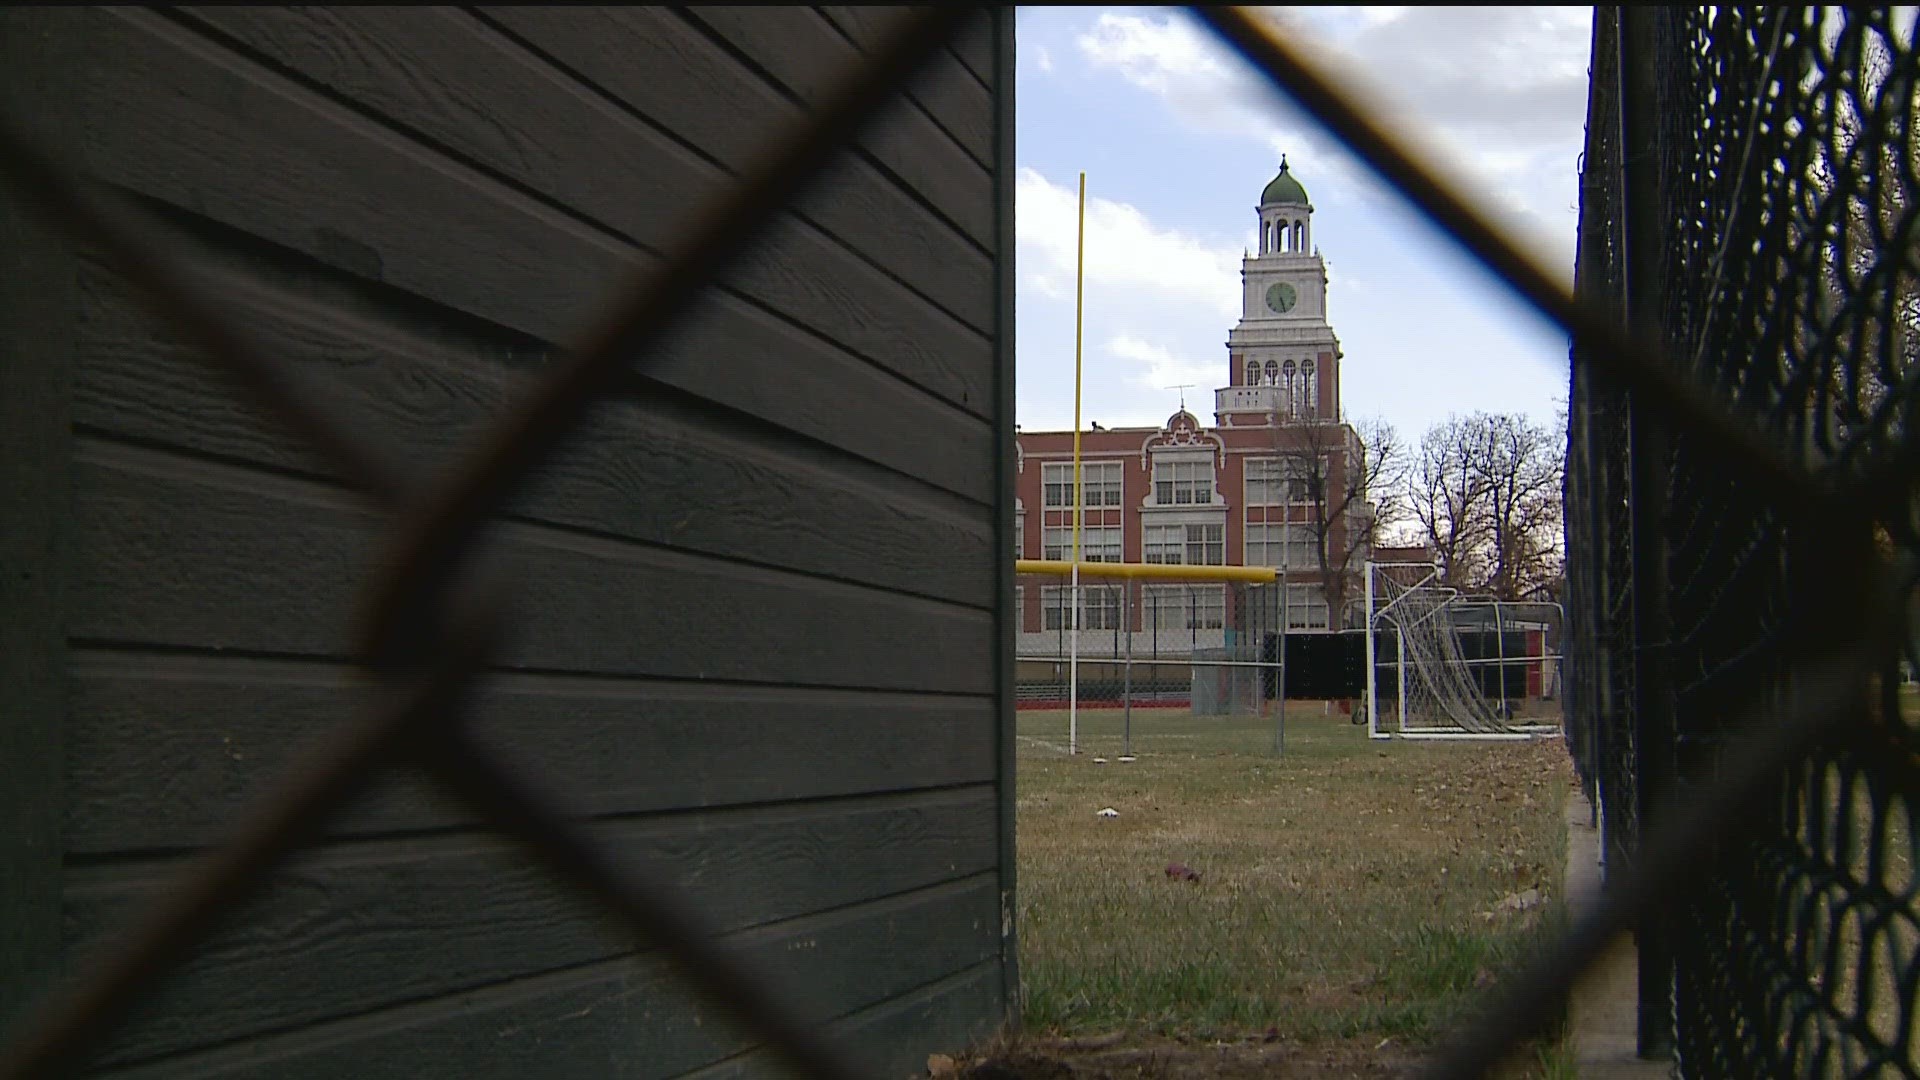 The change to bring back school resource officers happened after two shootings at East High School.